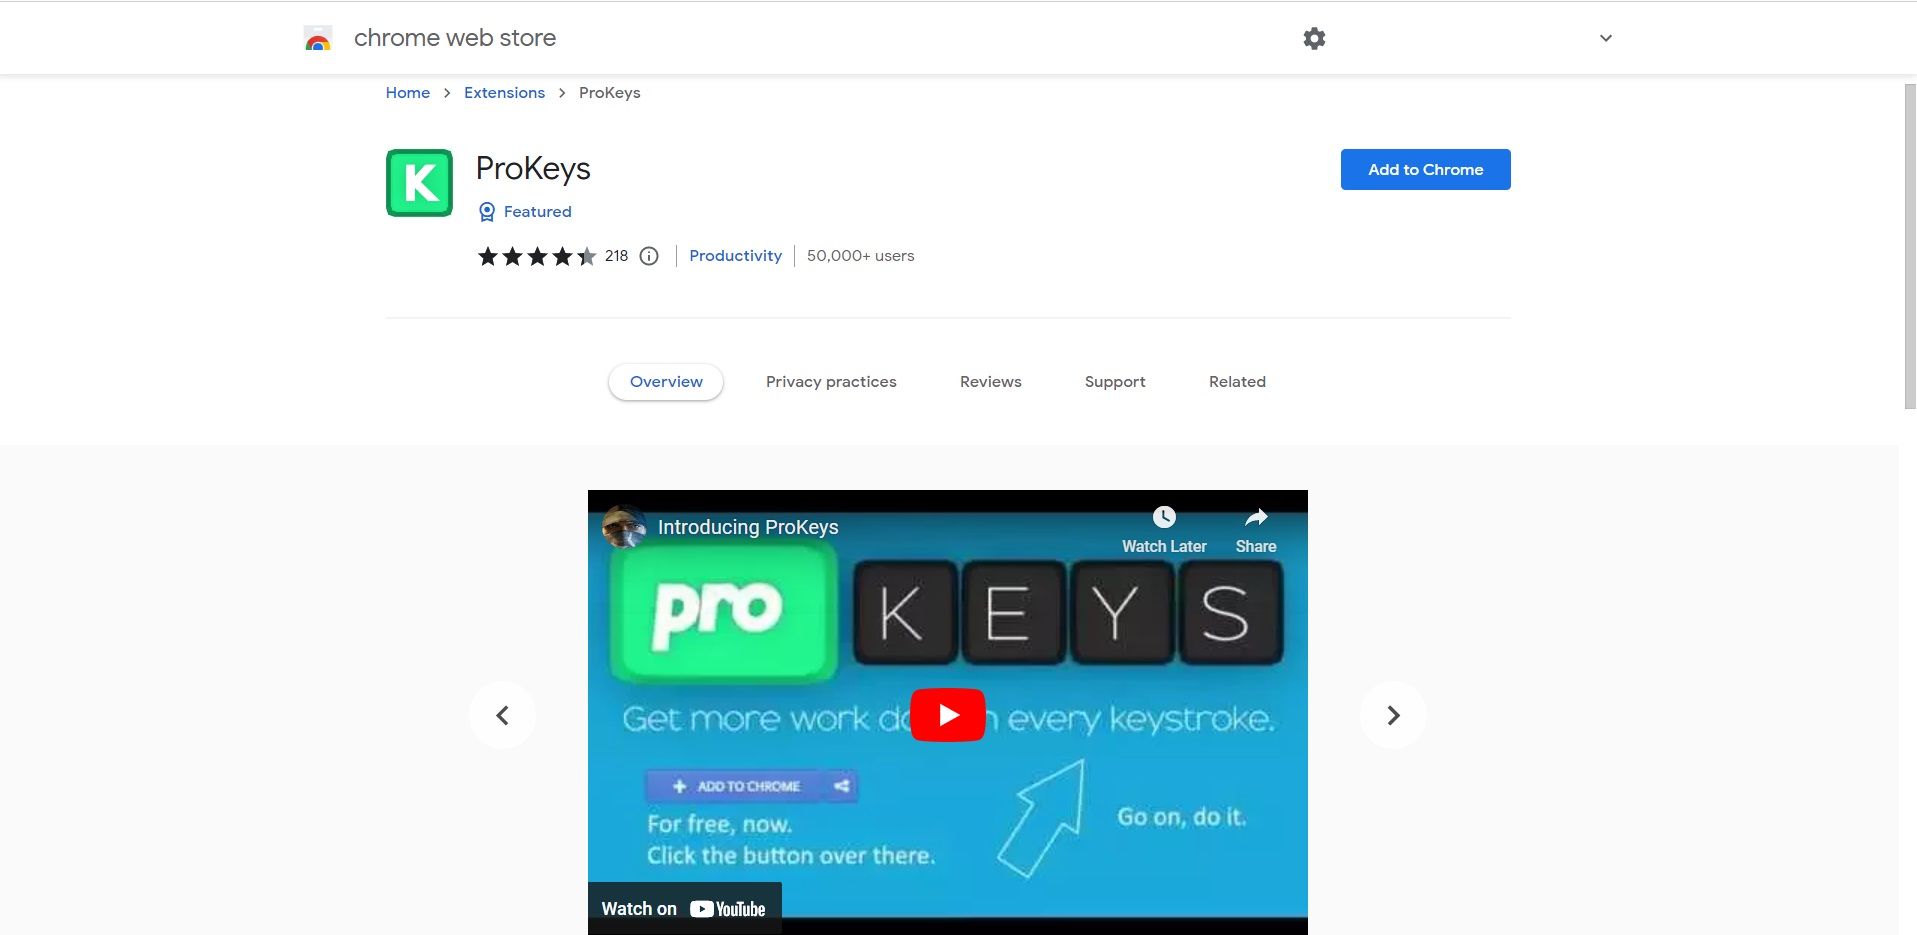 ProKeys extension page in Chrome web store